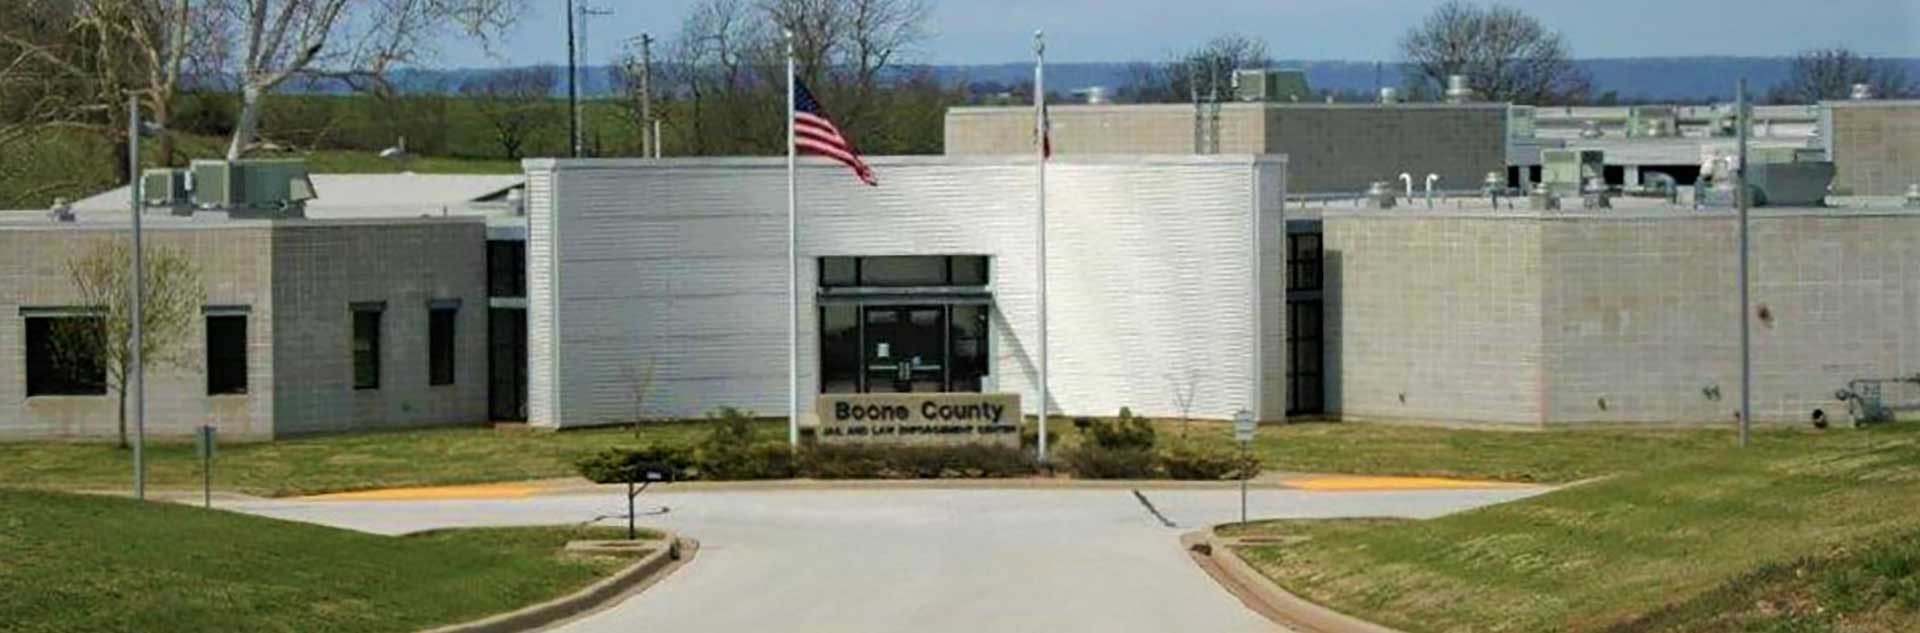 Boone County Arkansas Jail and Law Enforcement Center Entrance